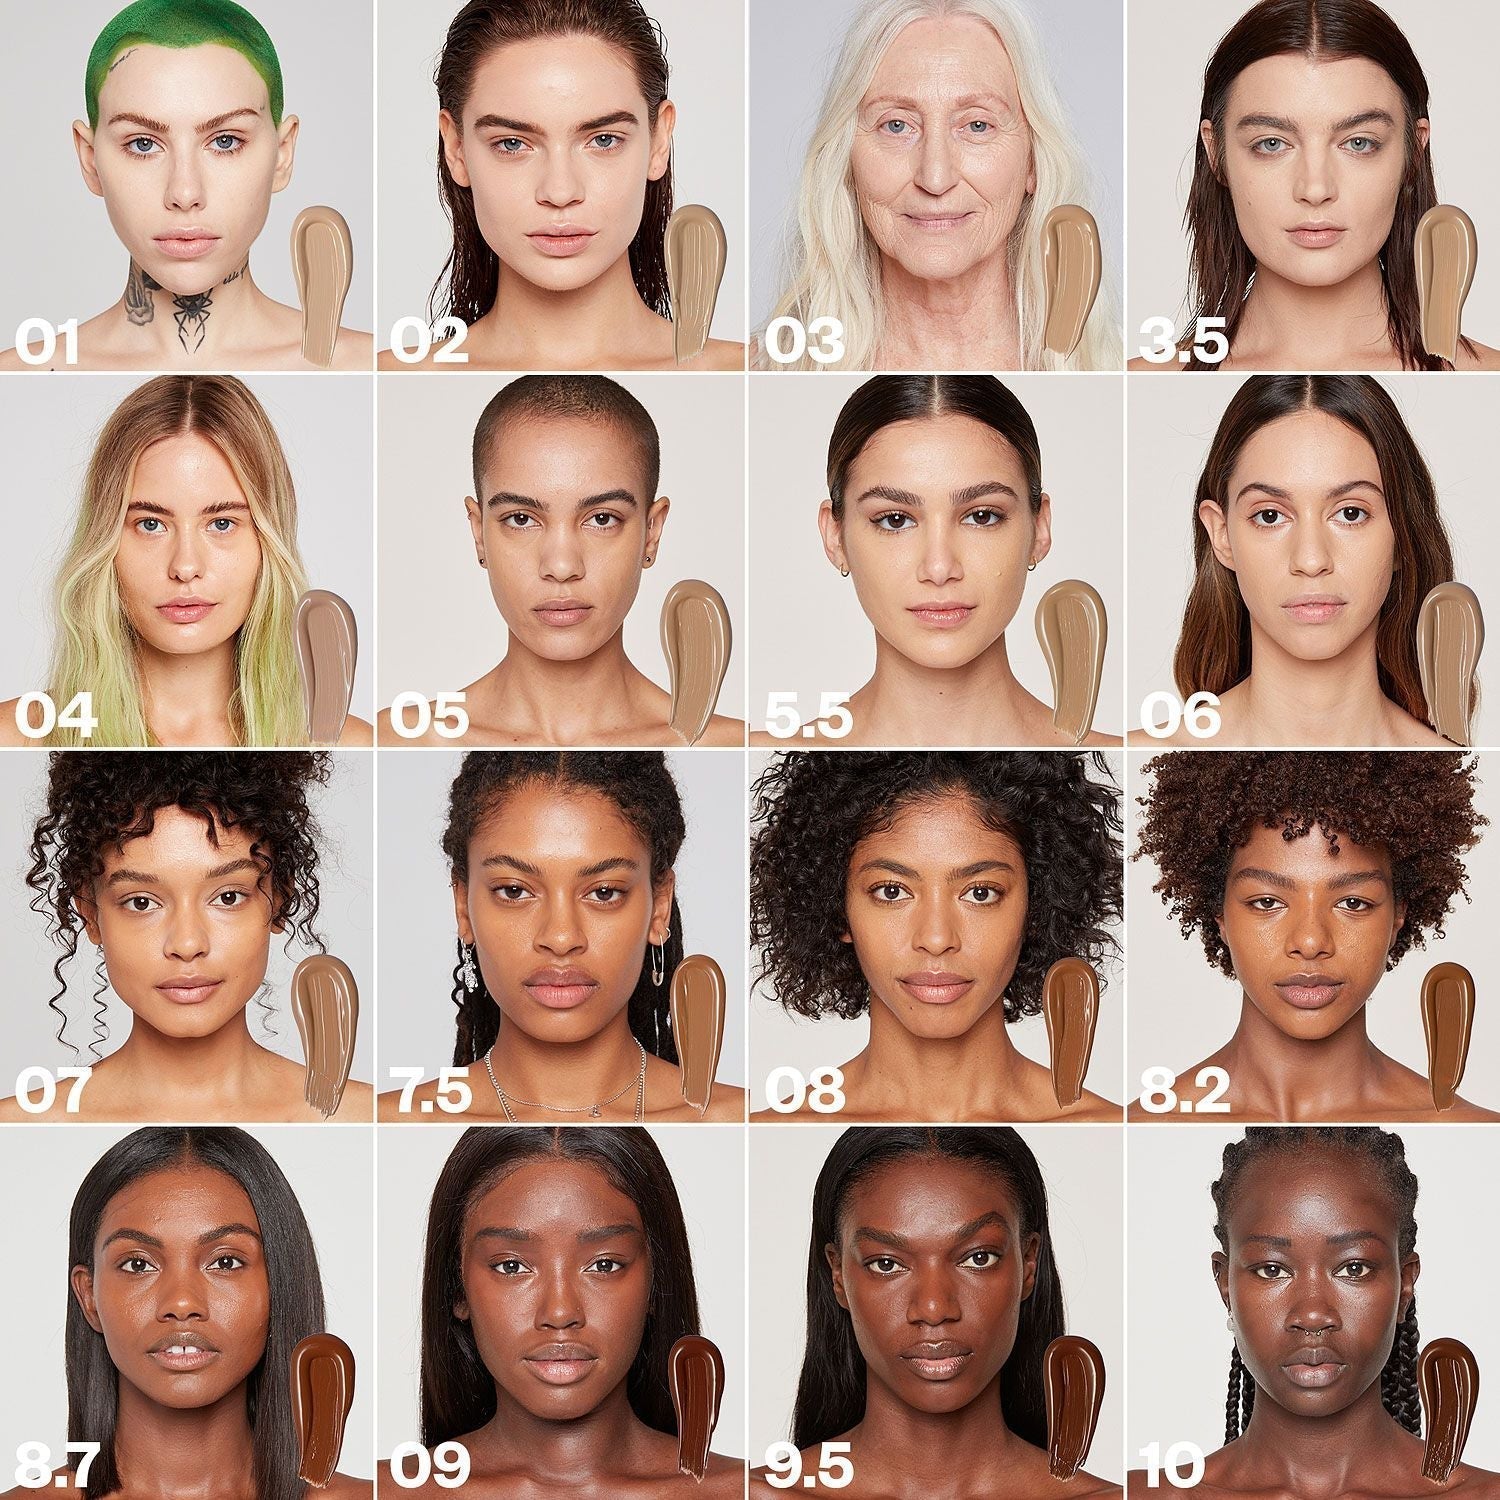 Kosas Cosmetics Revealer Concealer Super Creamy + Brightening Color Chart with colors on model faces